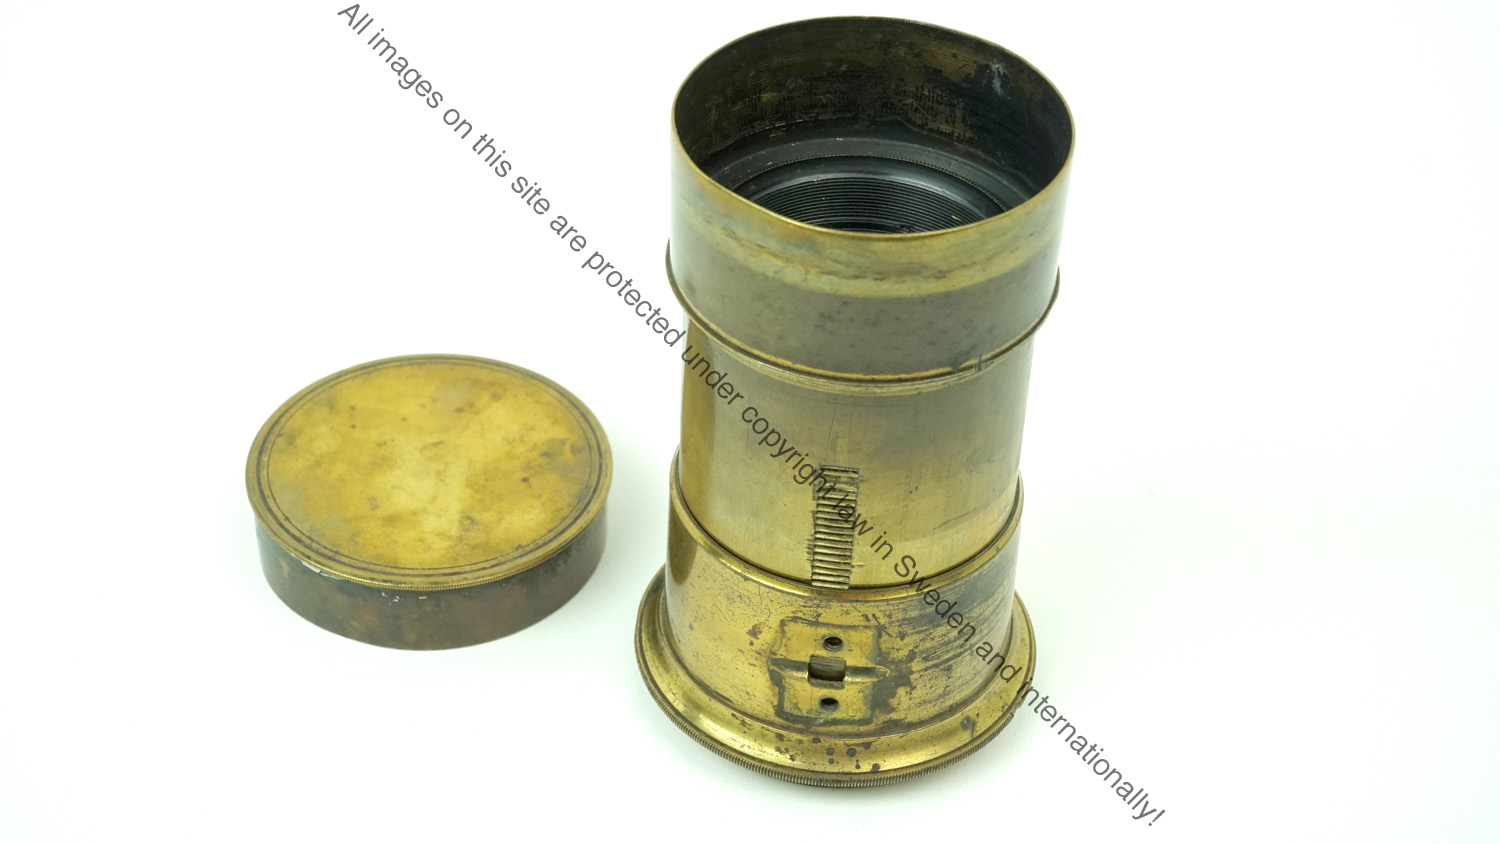 Unmarked Petzval lens3